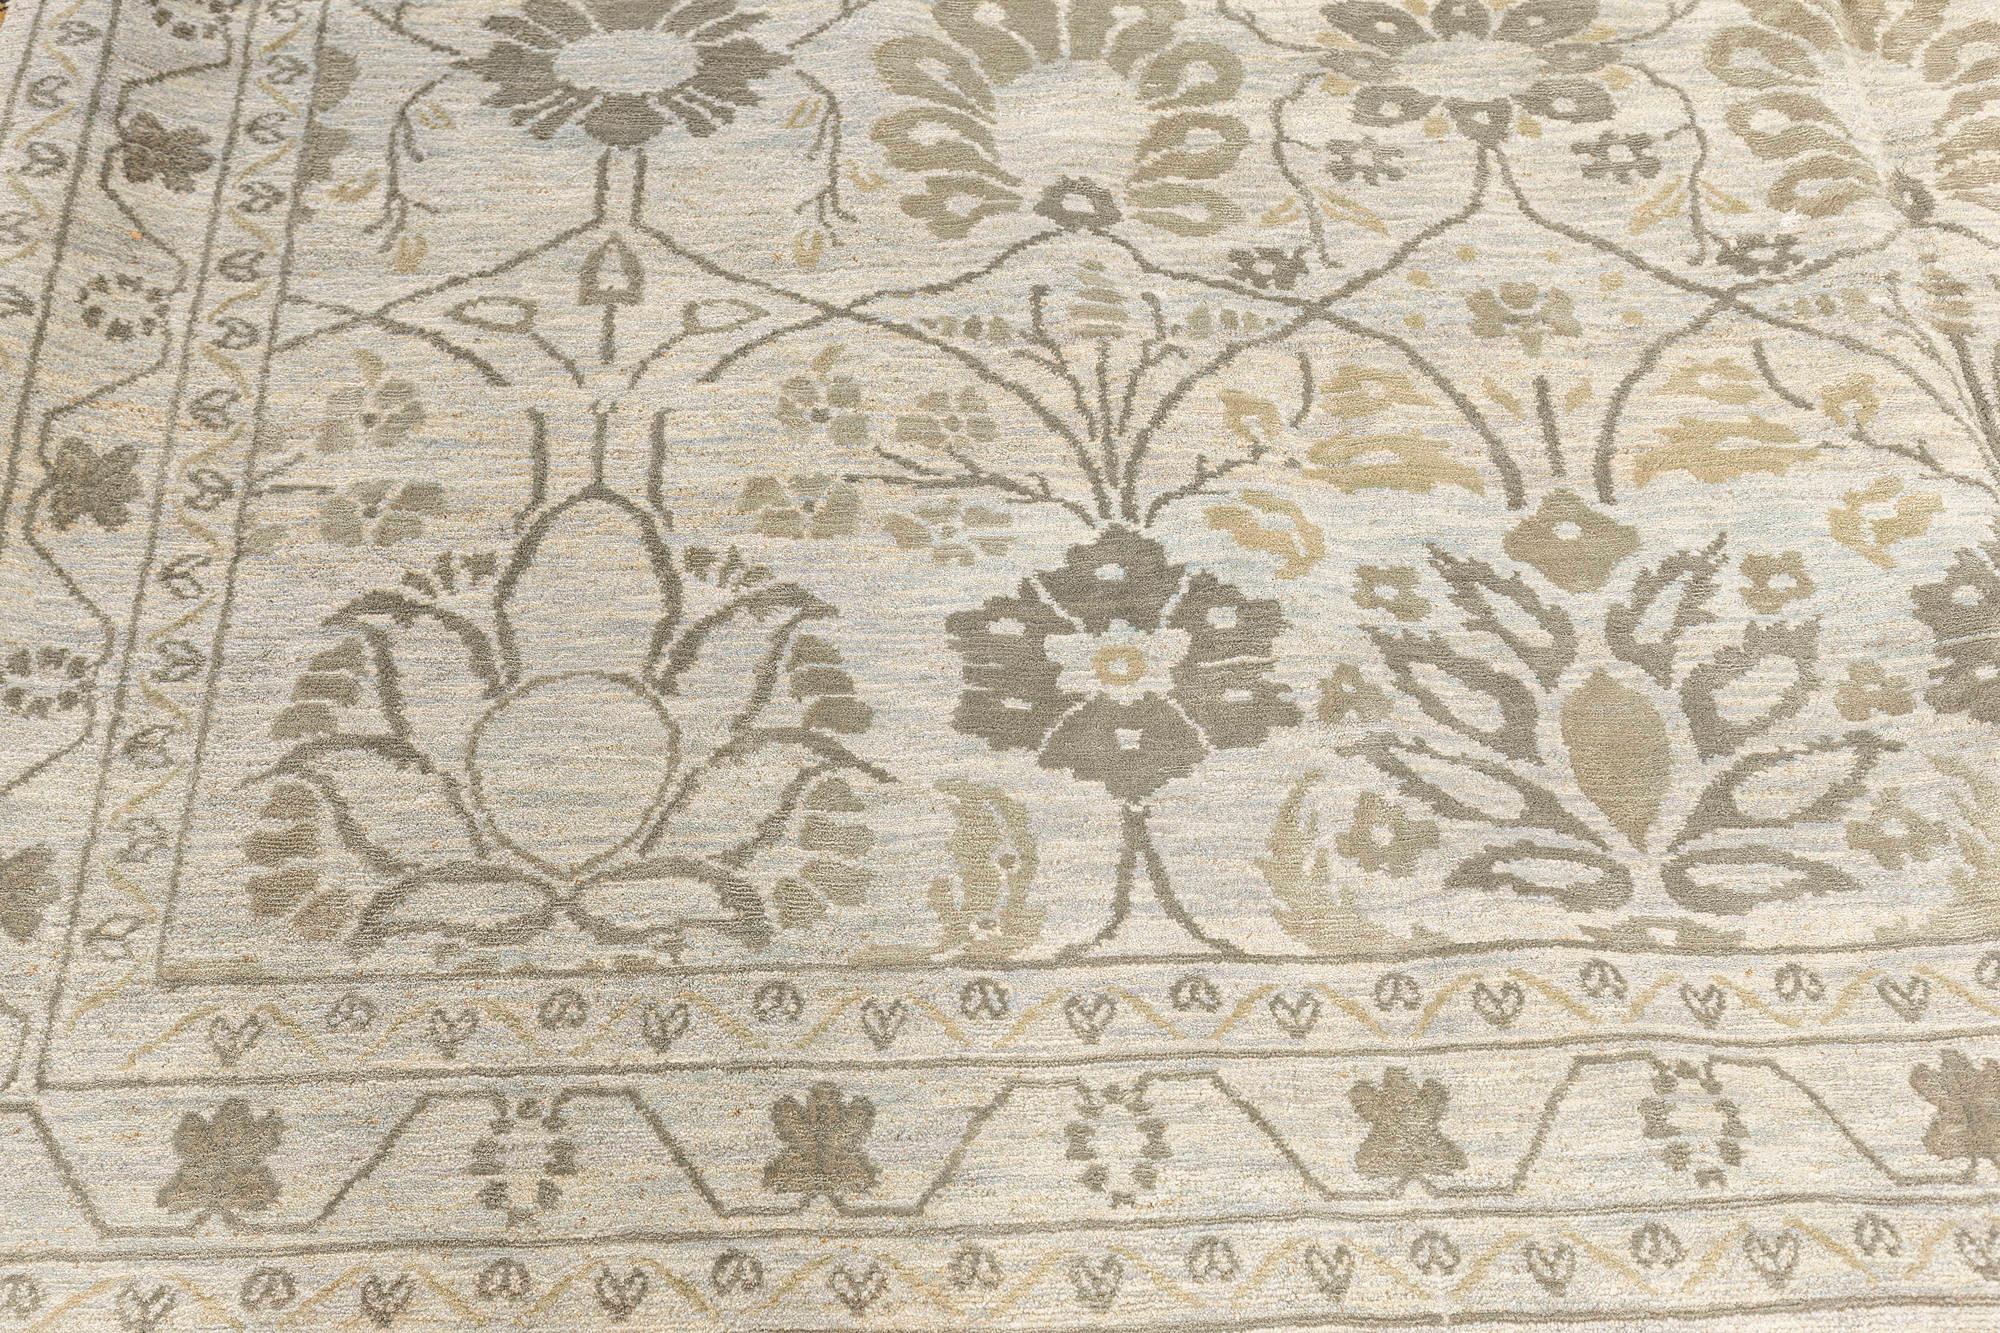 Contemporary Indian Inspired Botanic Handmade Rug by Doris Leslie Blau In New Condition For Sale In New York, NY